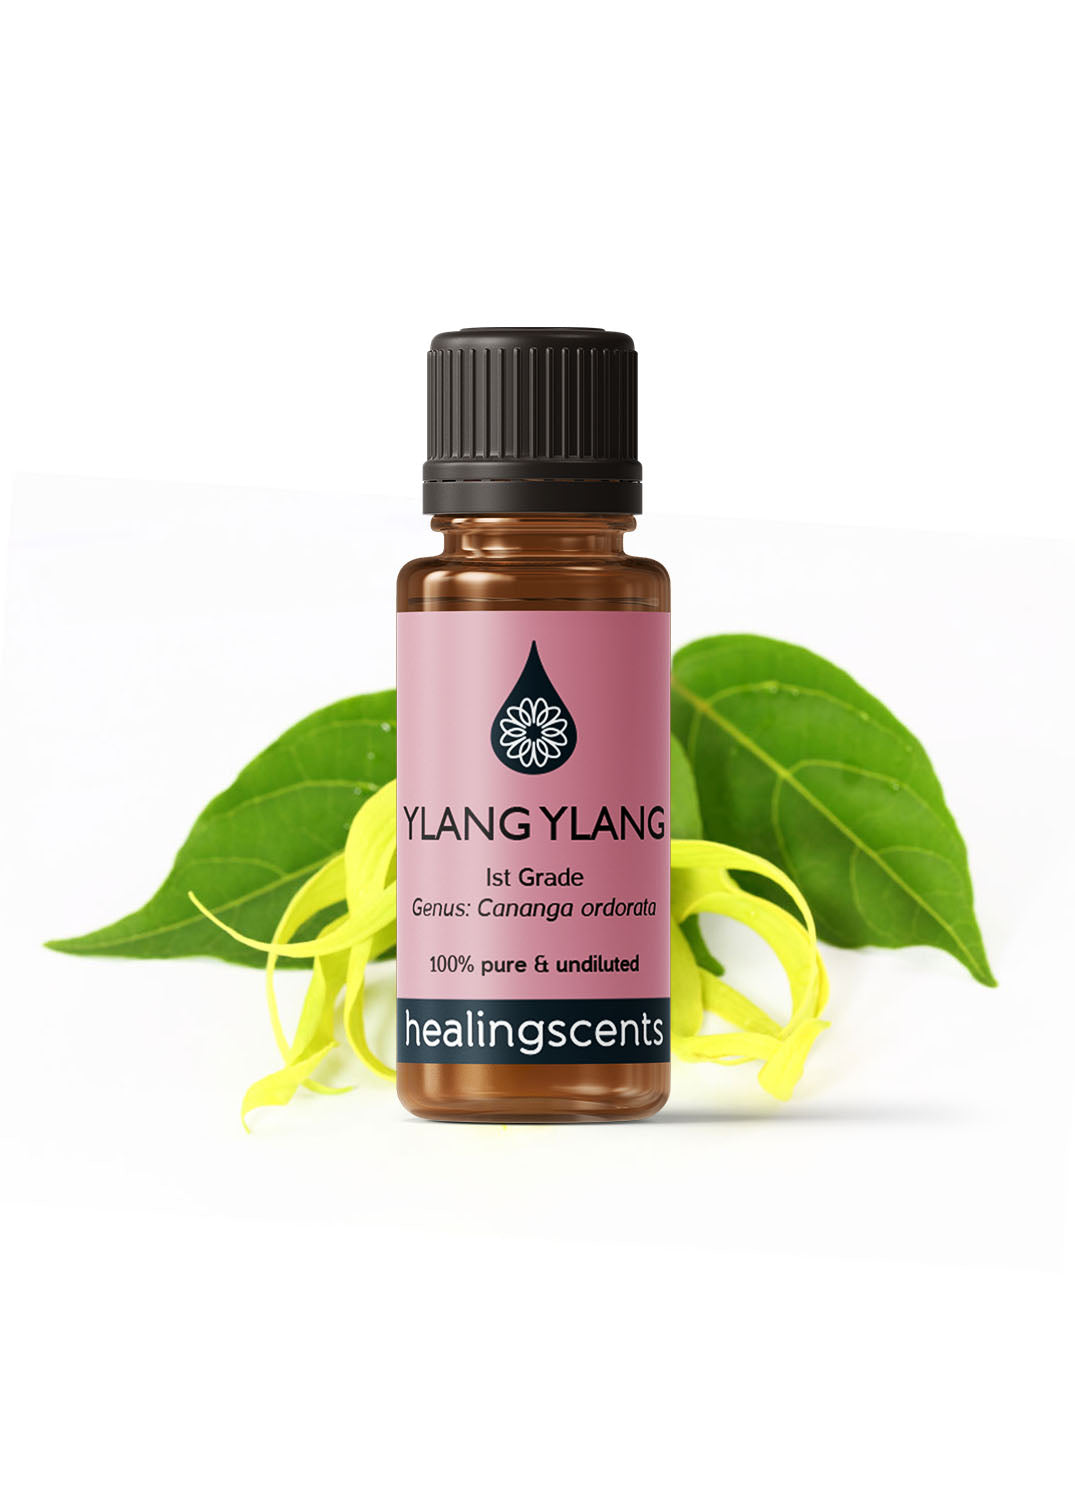 Ylang Ylang 1st Grade Certified Organic Essential Oil Essential Oils Healingscents   